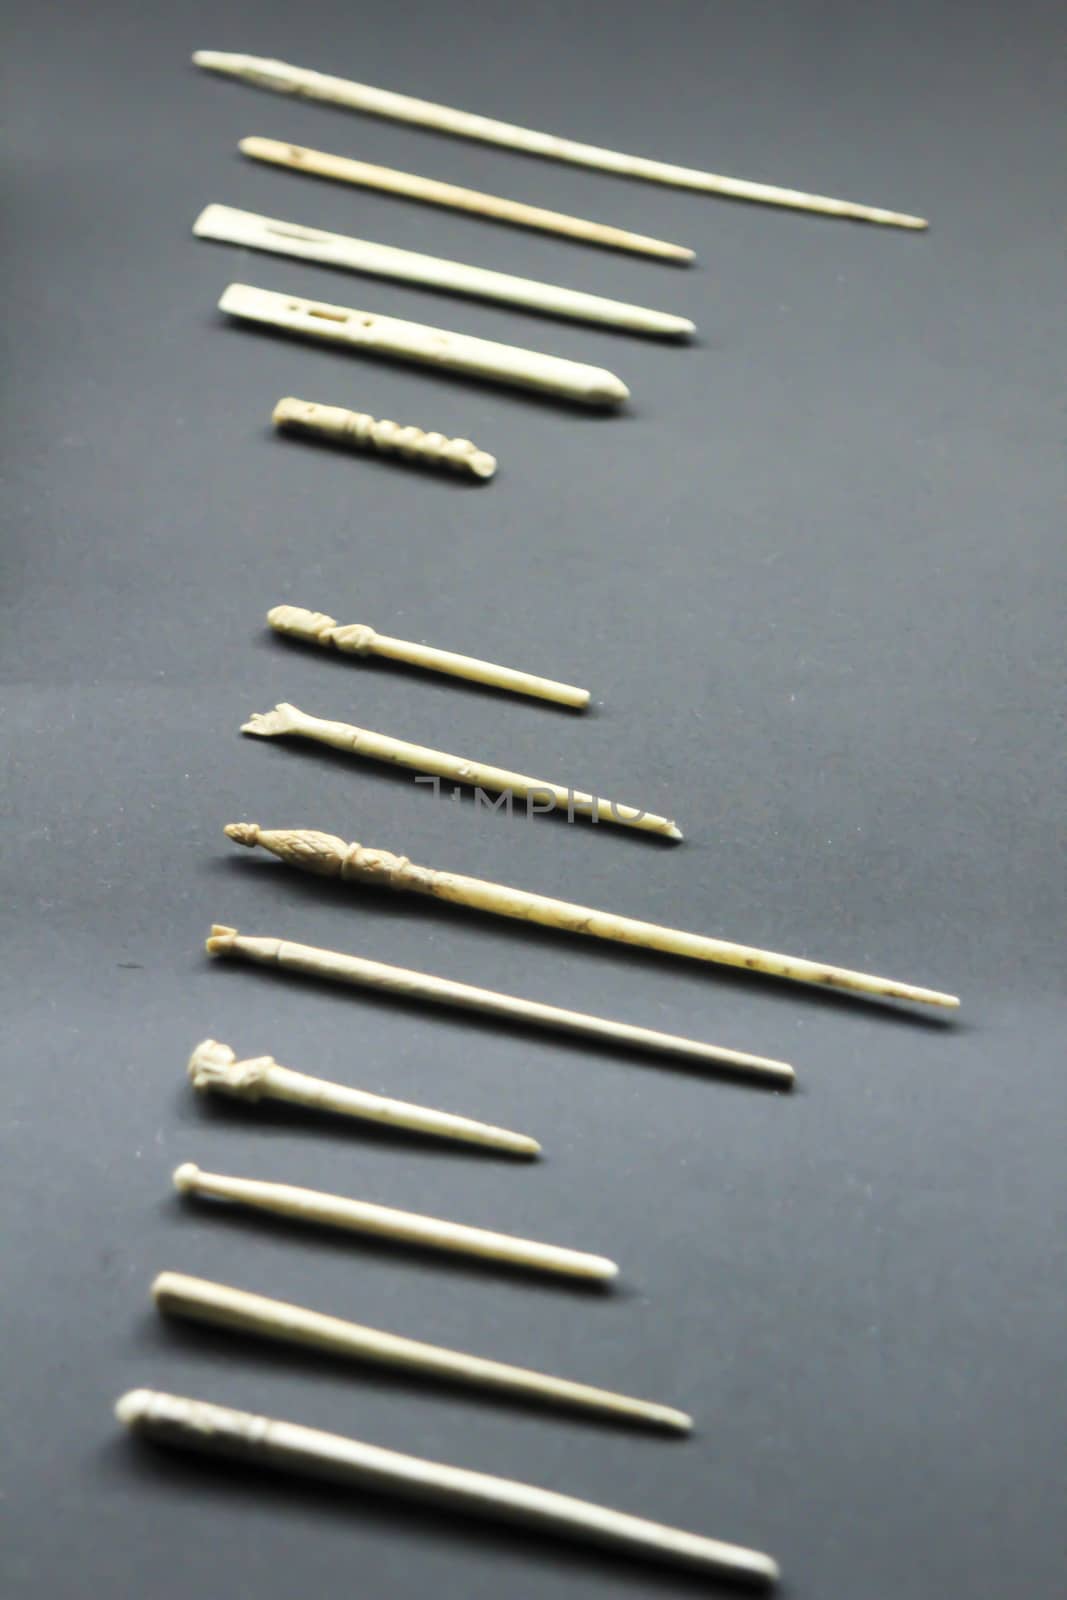 Alicante, Spain- October 8, 2020: Roman bone needles to hold hair of the 1st and 2nd century exhibited at the Archaeological Museum of Alicante